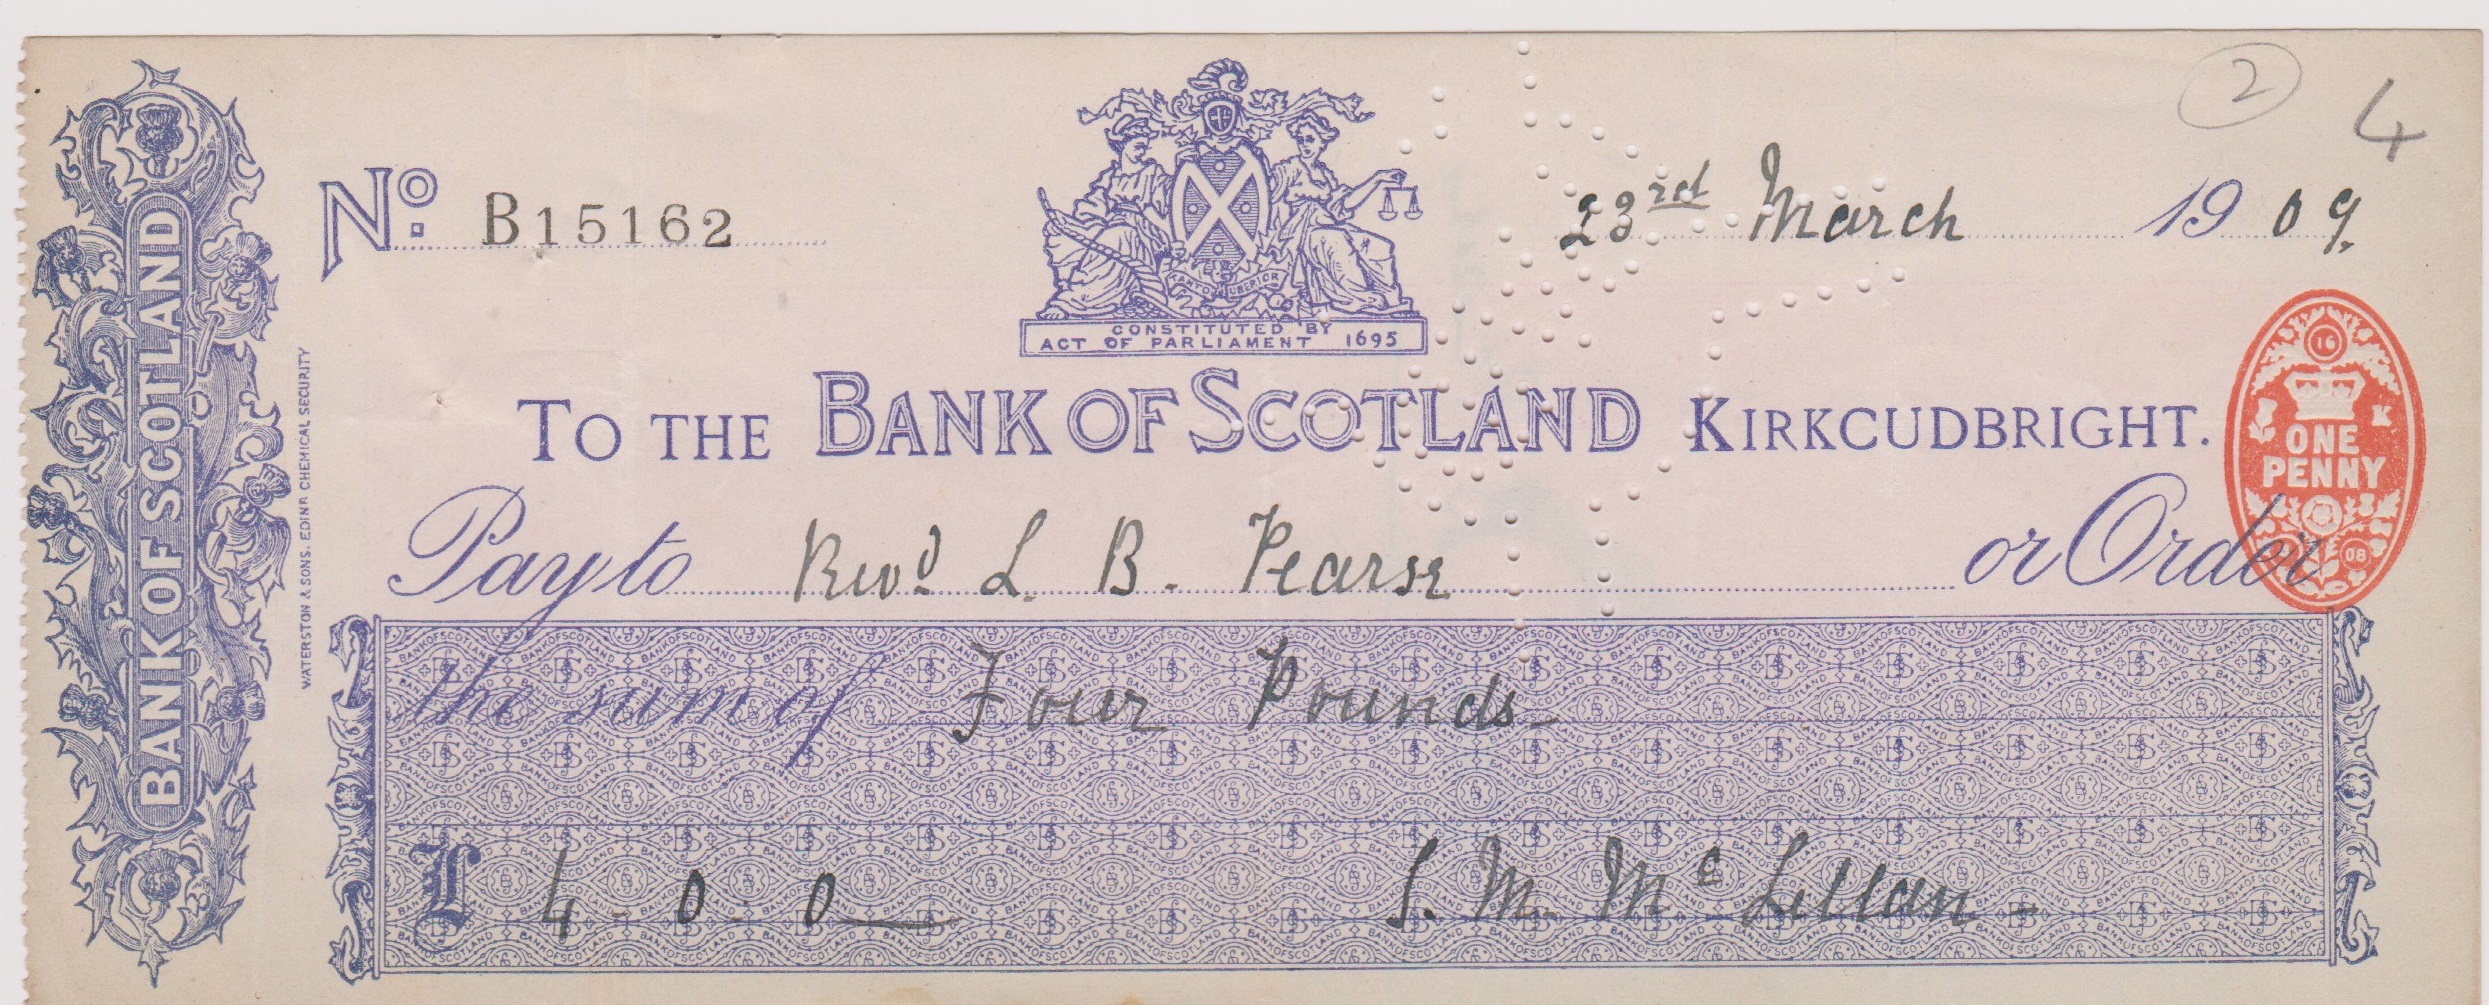 Bank of Scotland Kirkcudbright, Used Order RO 16.4.08, violet on white, printer Waterston & Sons